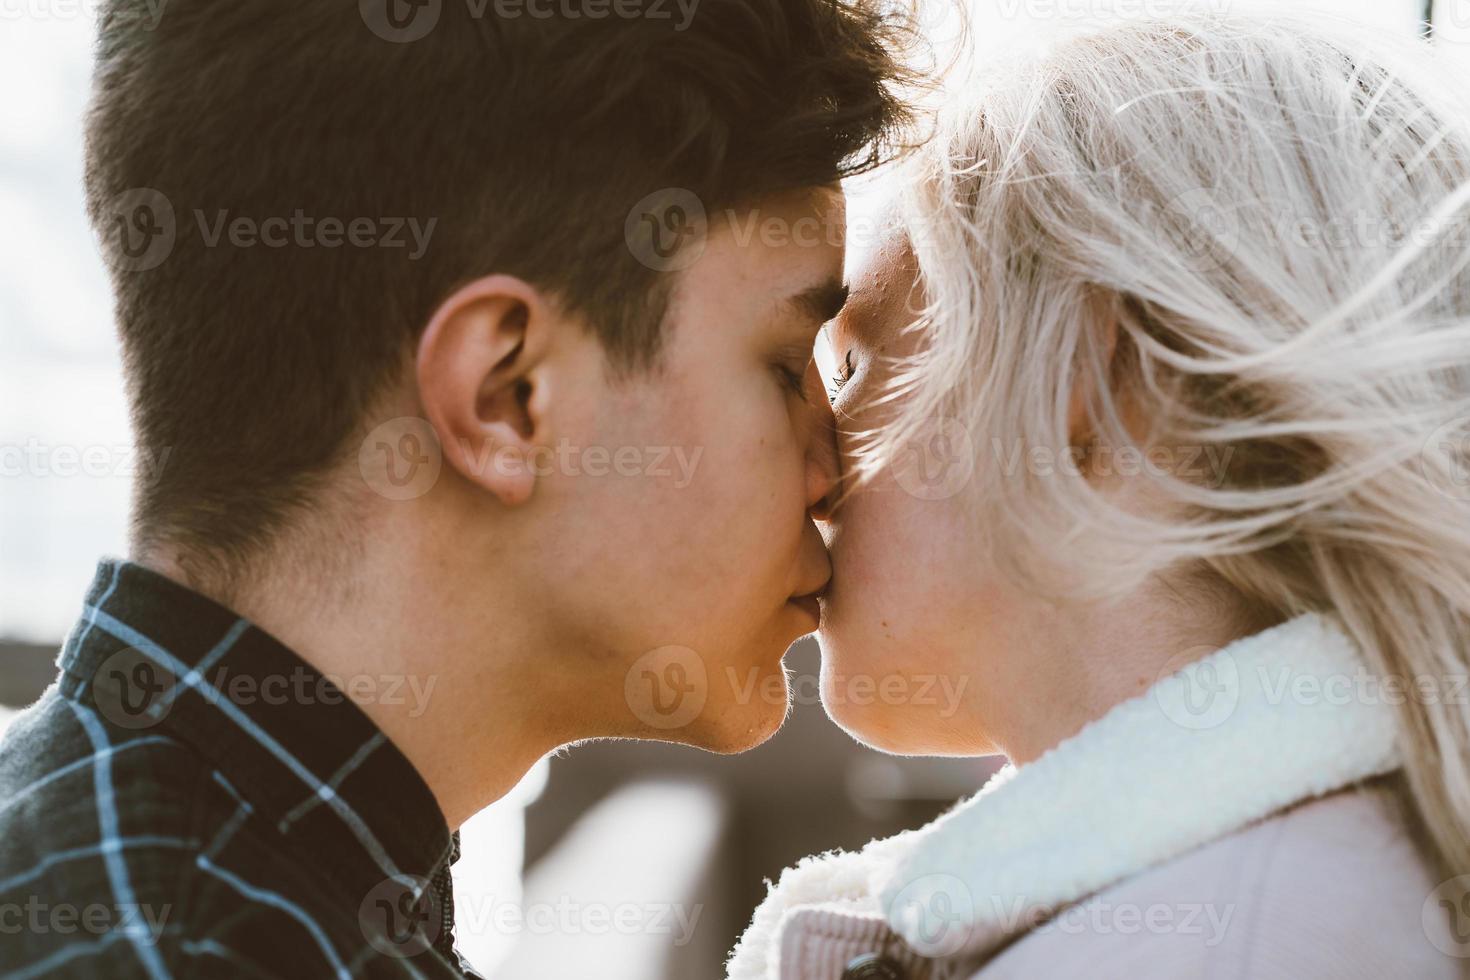 The boy looks tenderly at girl and wants to kiss. A young couple stands embracing. The concept of teenage love and first kiss, sincere feelings of man and woman. The city, the waterfront. Close up photo